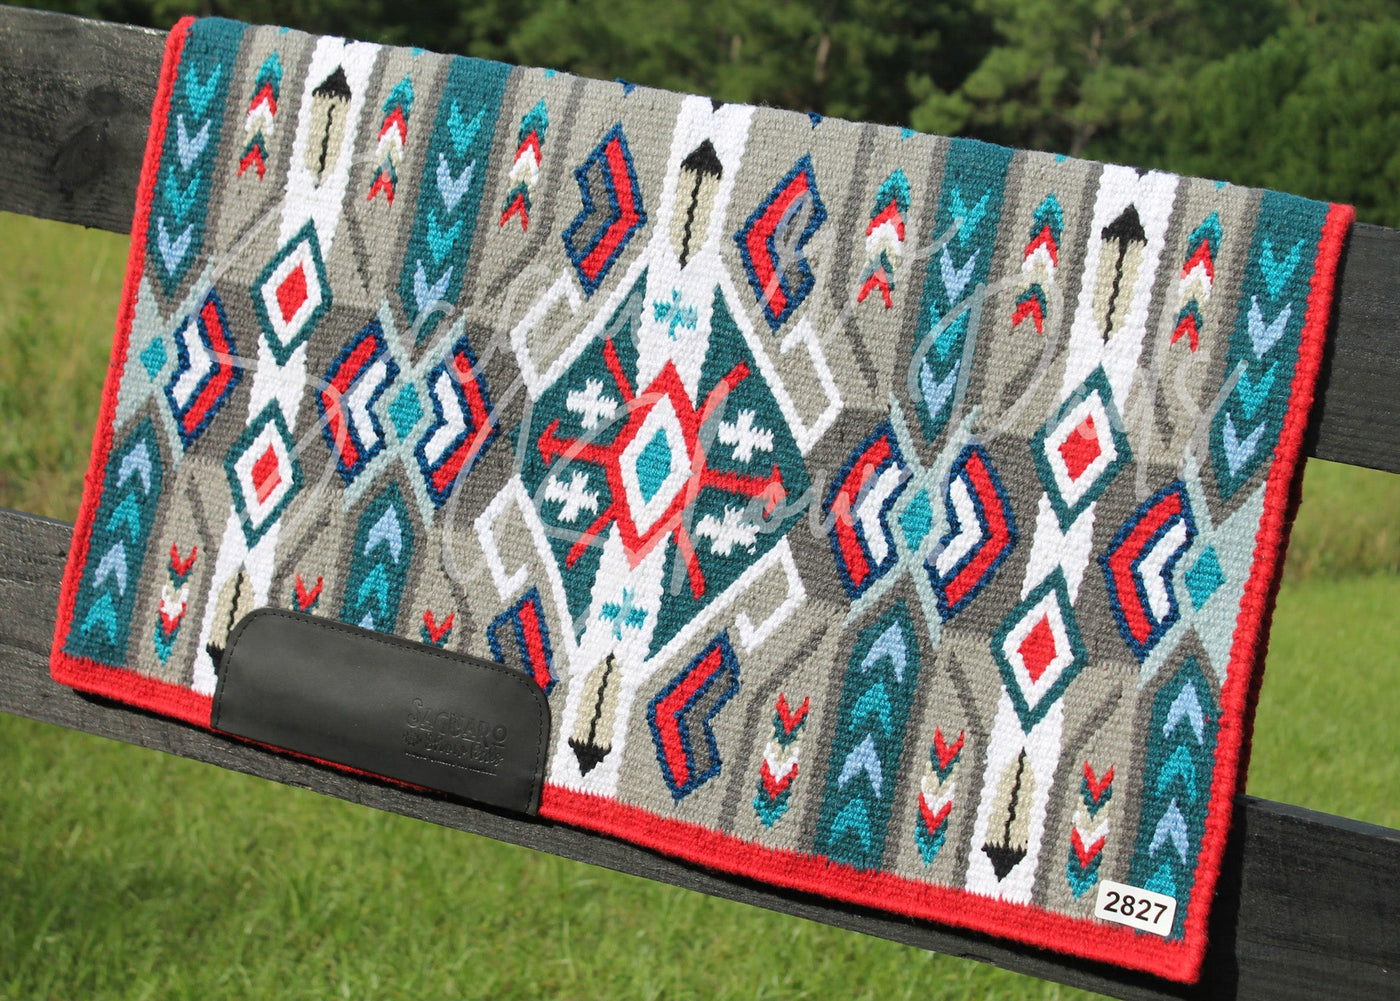 #2827 "Blanche" Ranch Pad - Re-Order